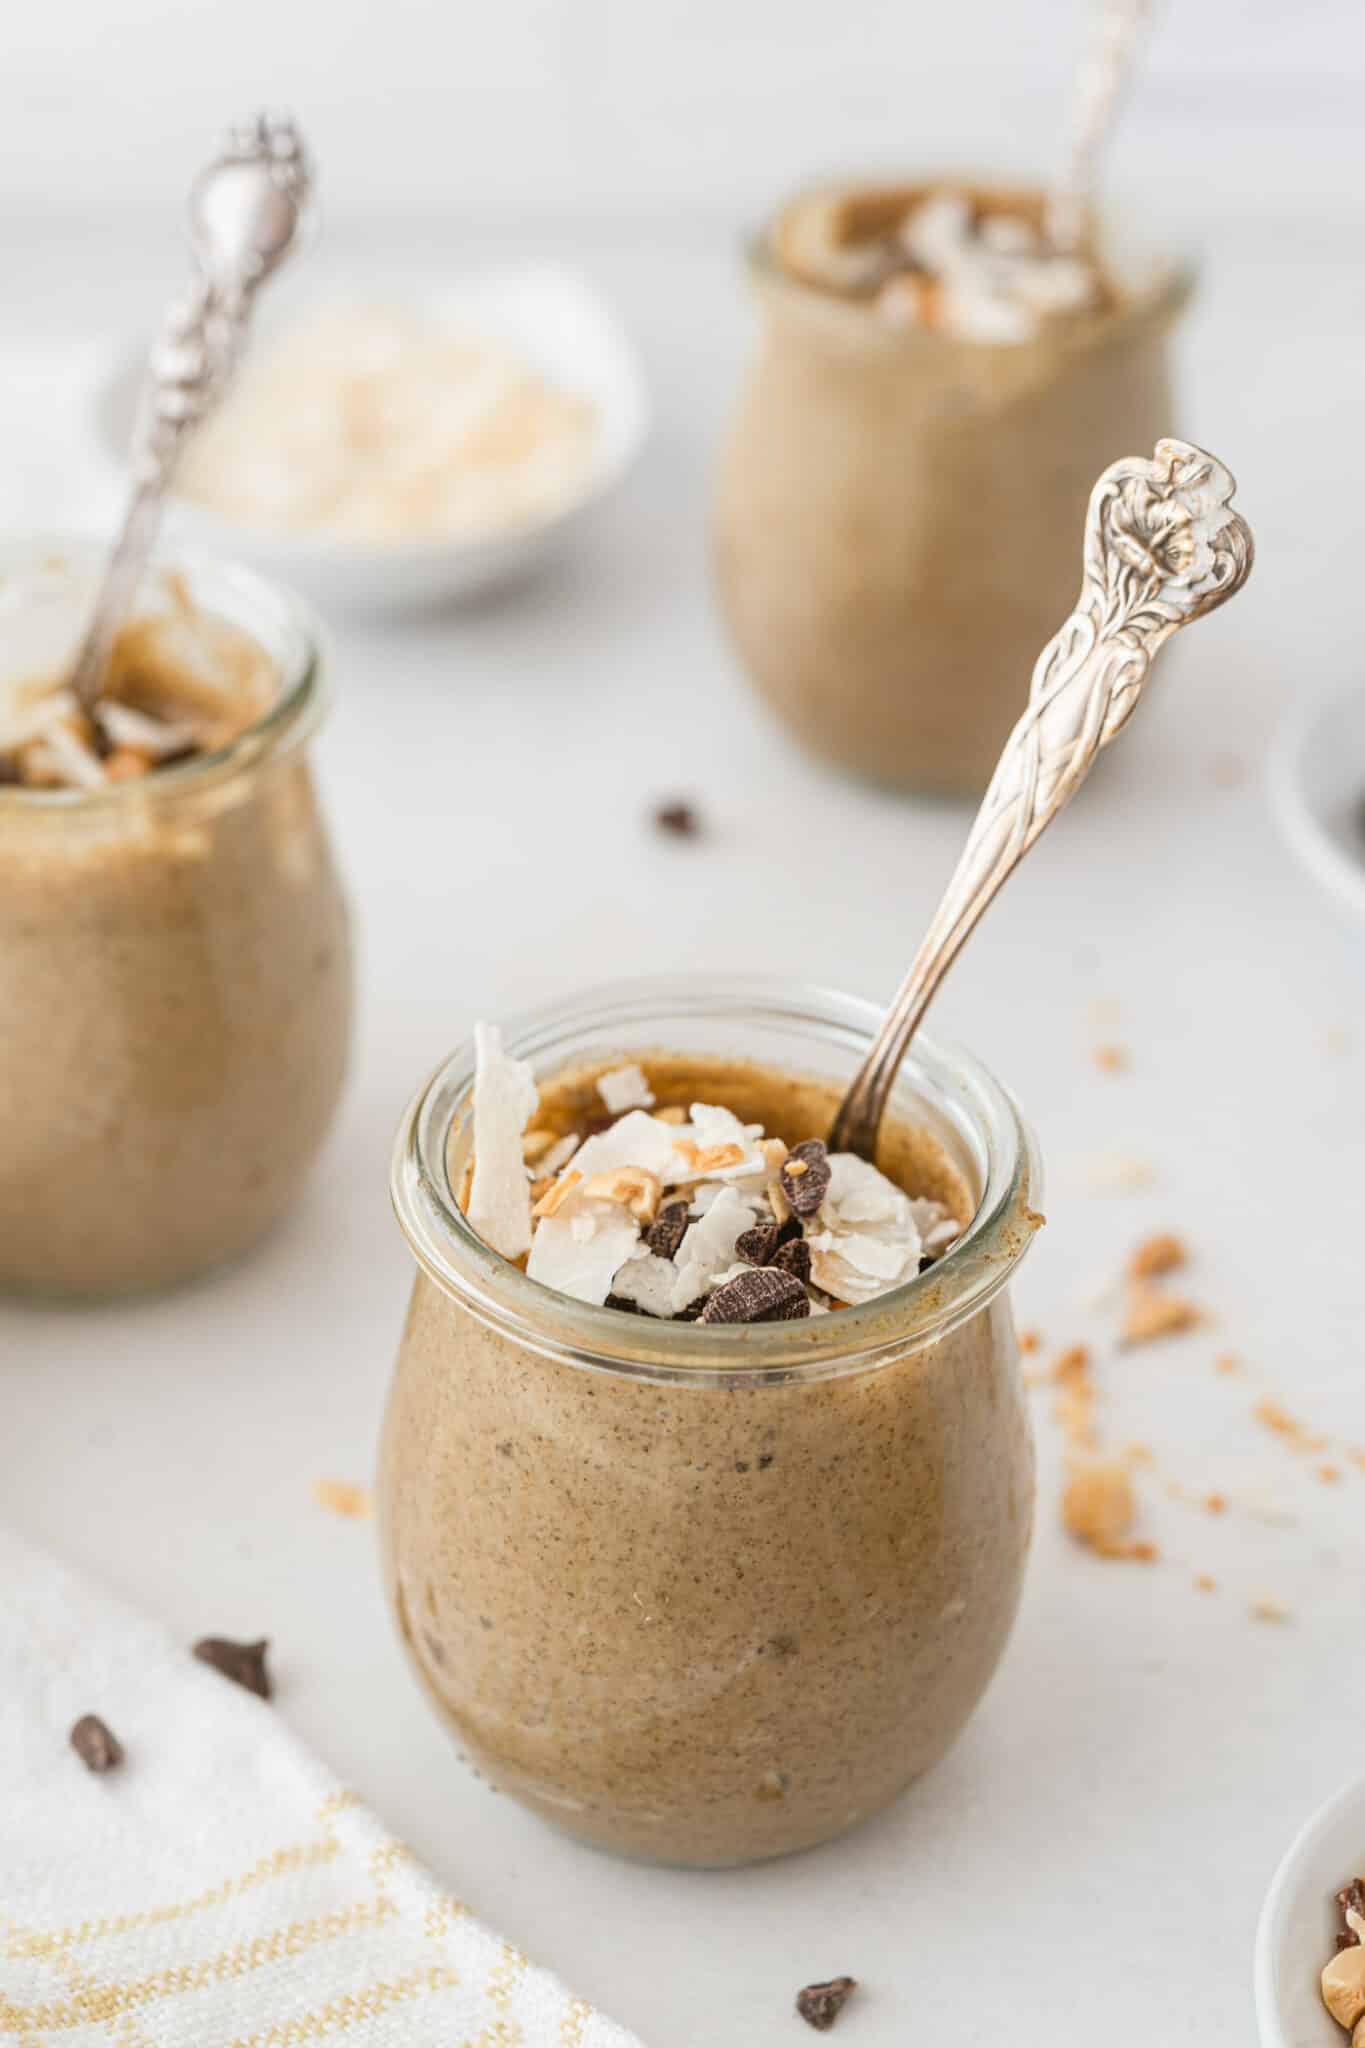 https://www.cleaneatingkitchen.com/wp-content/uploads/2022/10/Peanut-Butter-Chia-Pudding-jars-scaled.jpg